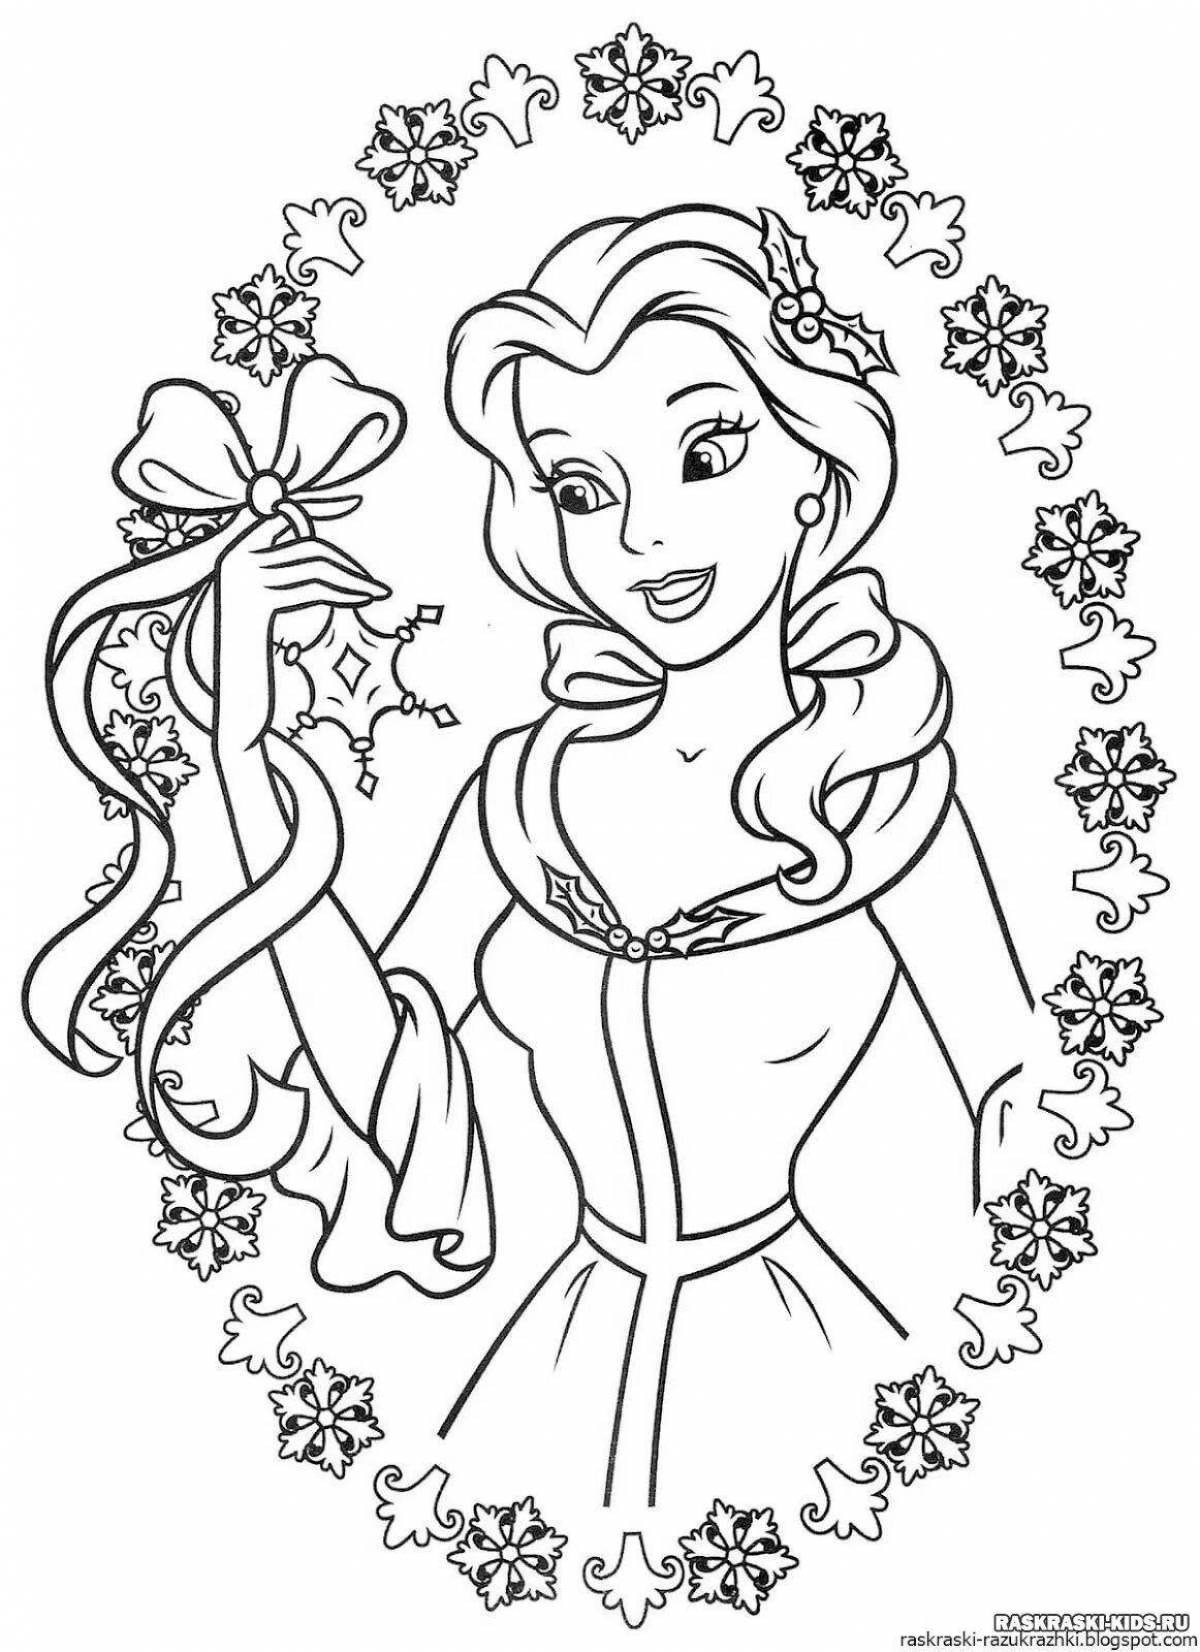 Colorful princesses coloring pages